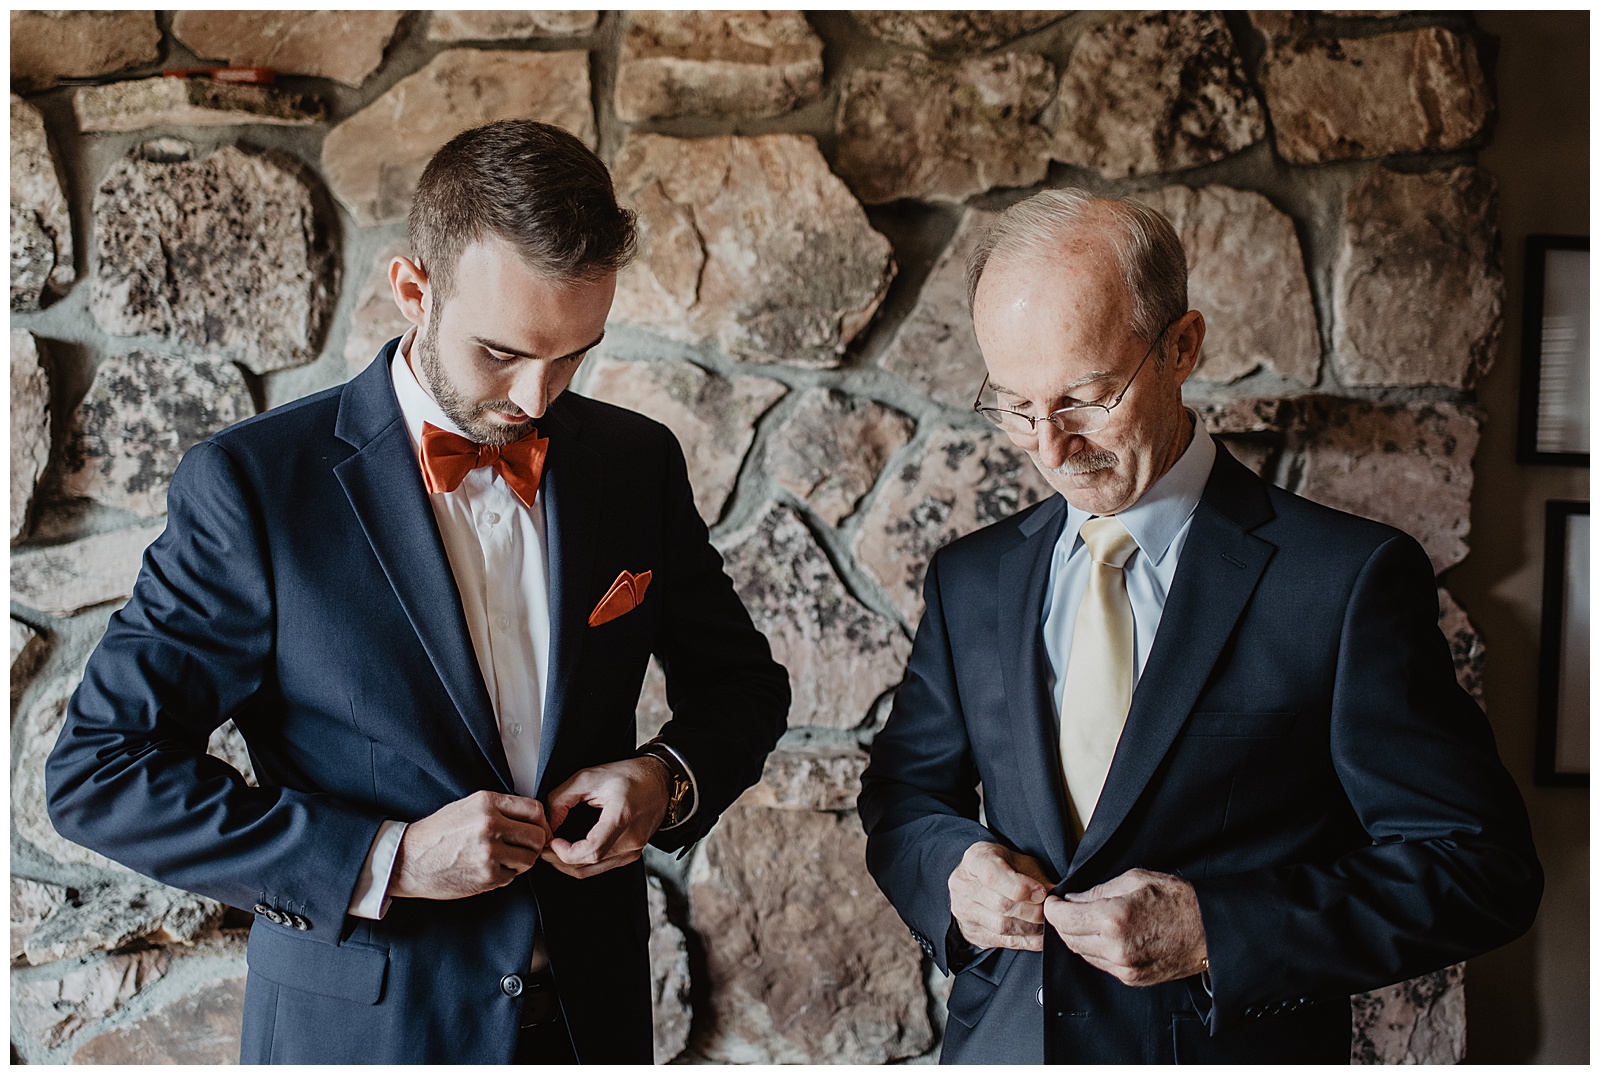 groom and his father buttoning their suit coats together while standing in front of a stone wall in the Tetons for the grooms fall wedding day